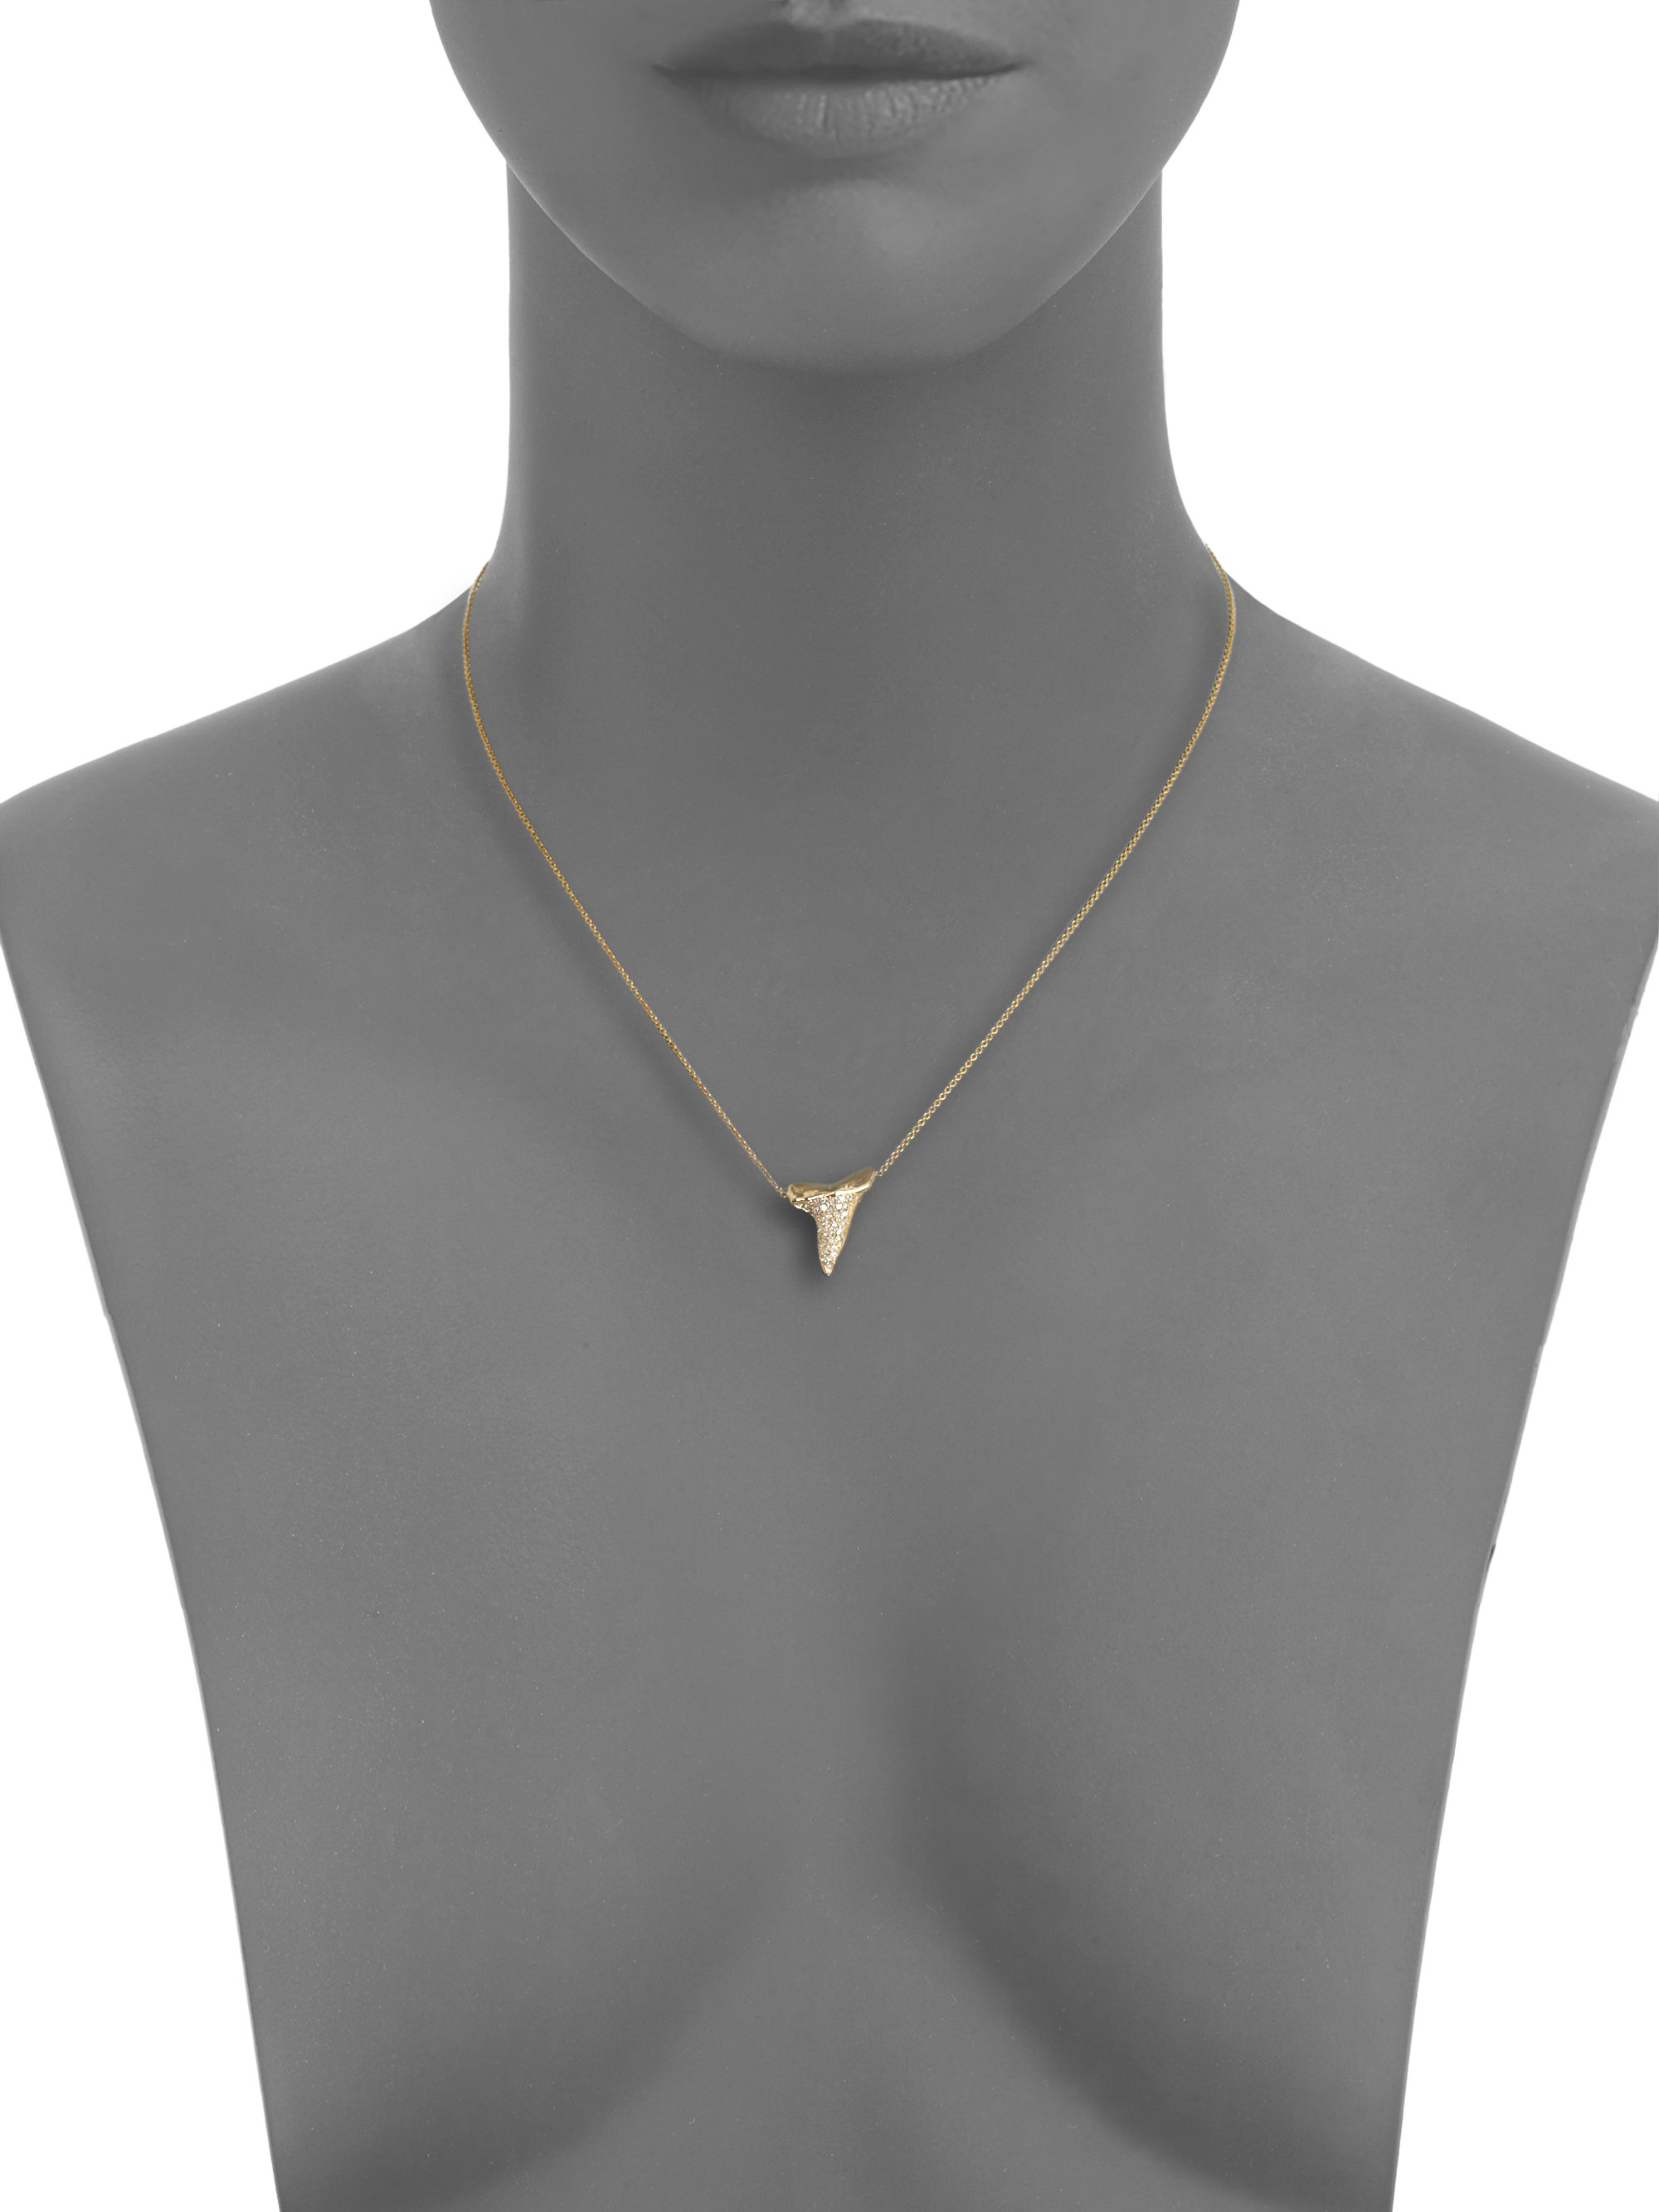 Shark Tooth Pendant Necklace 14K Yellow Gold Over With 18" Chain 